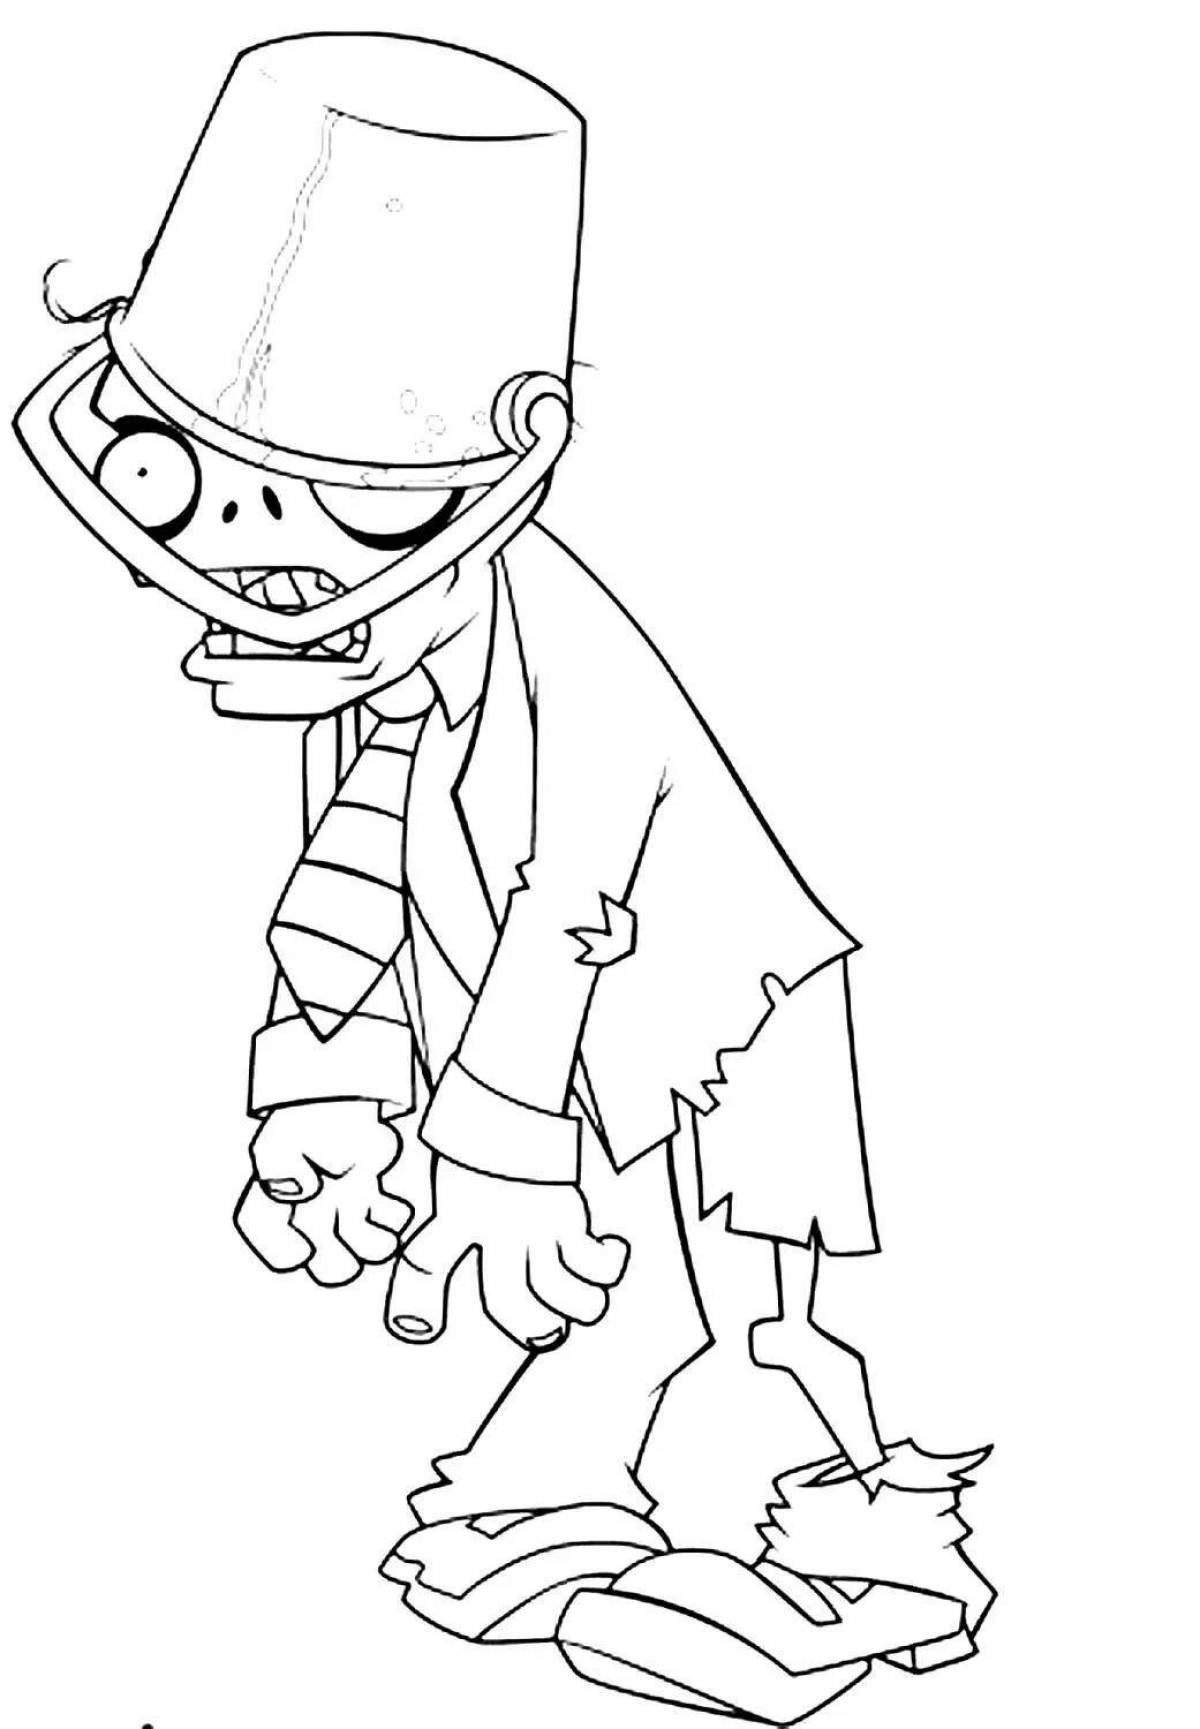 Charming doctor zombieboss coloring book